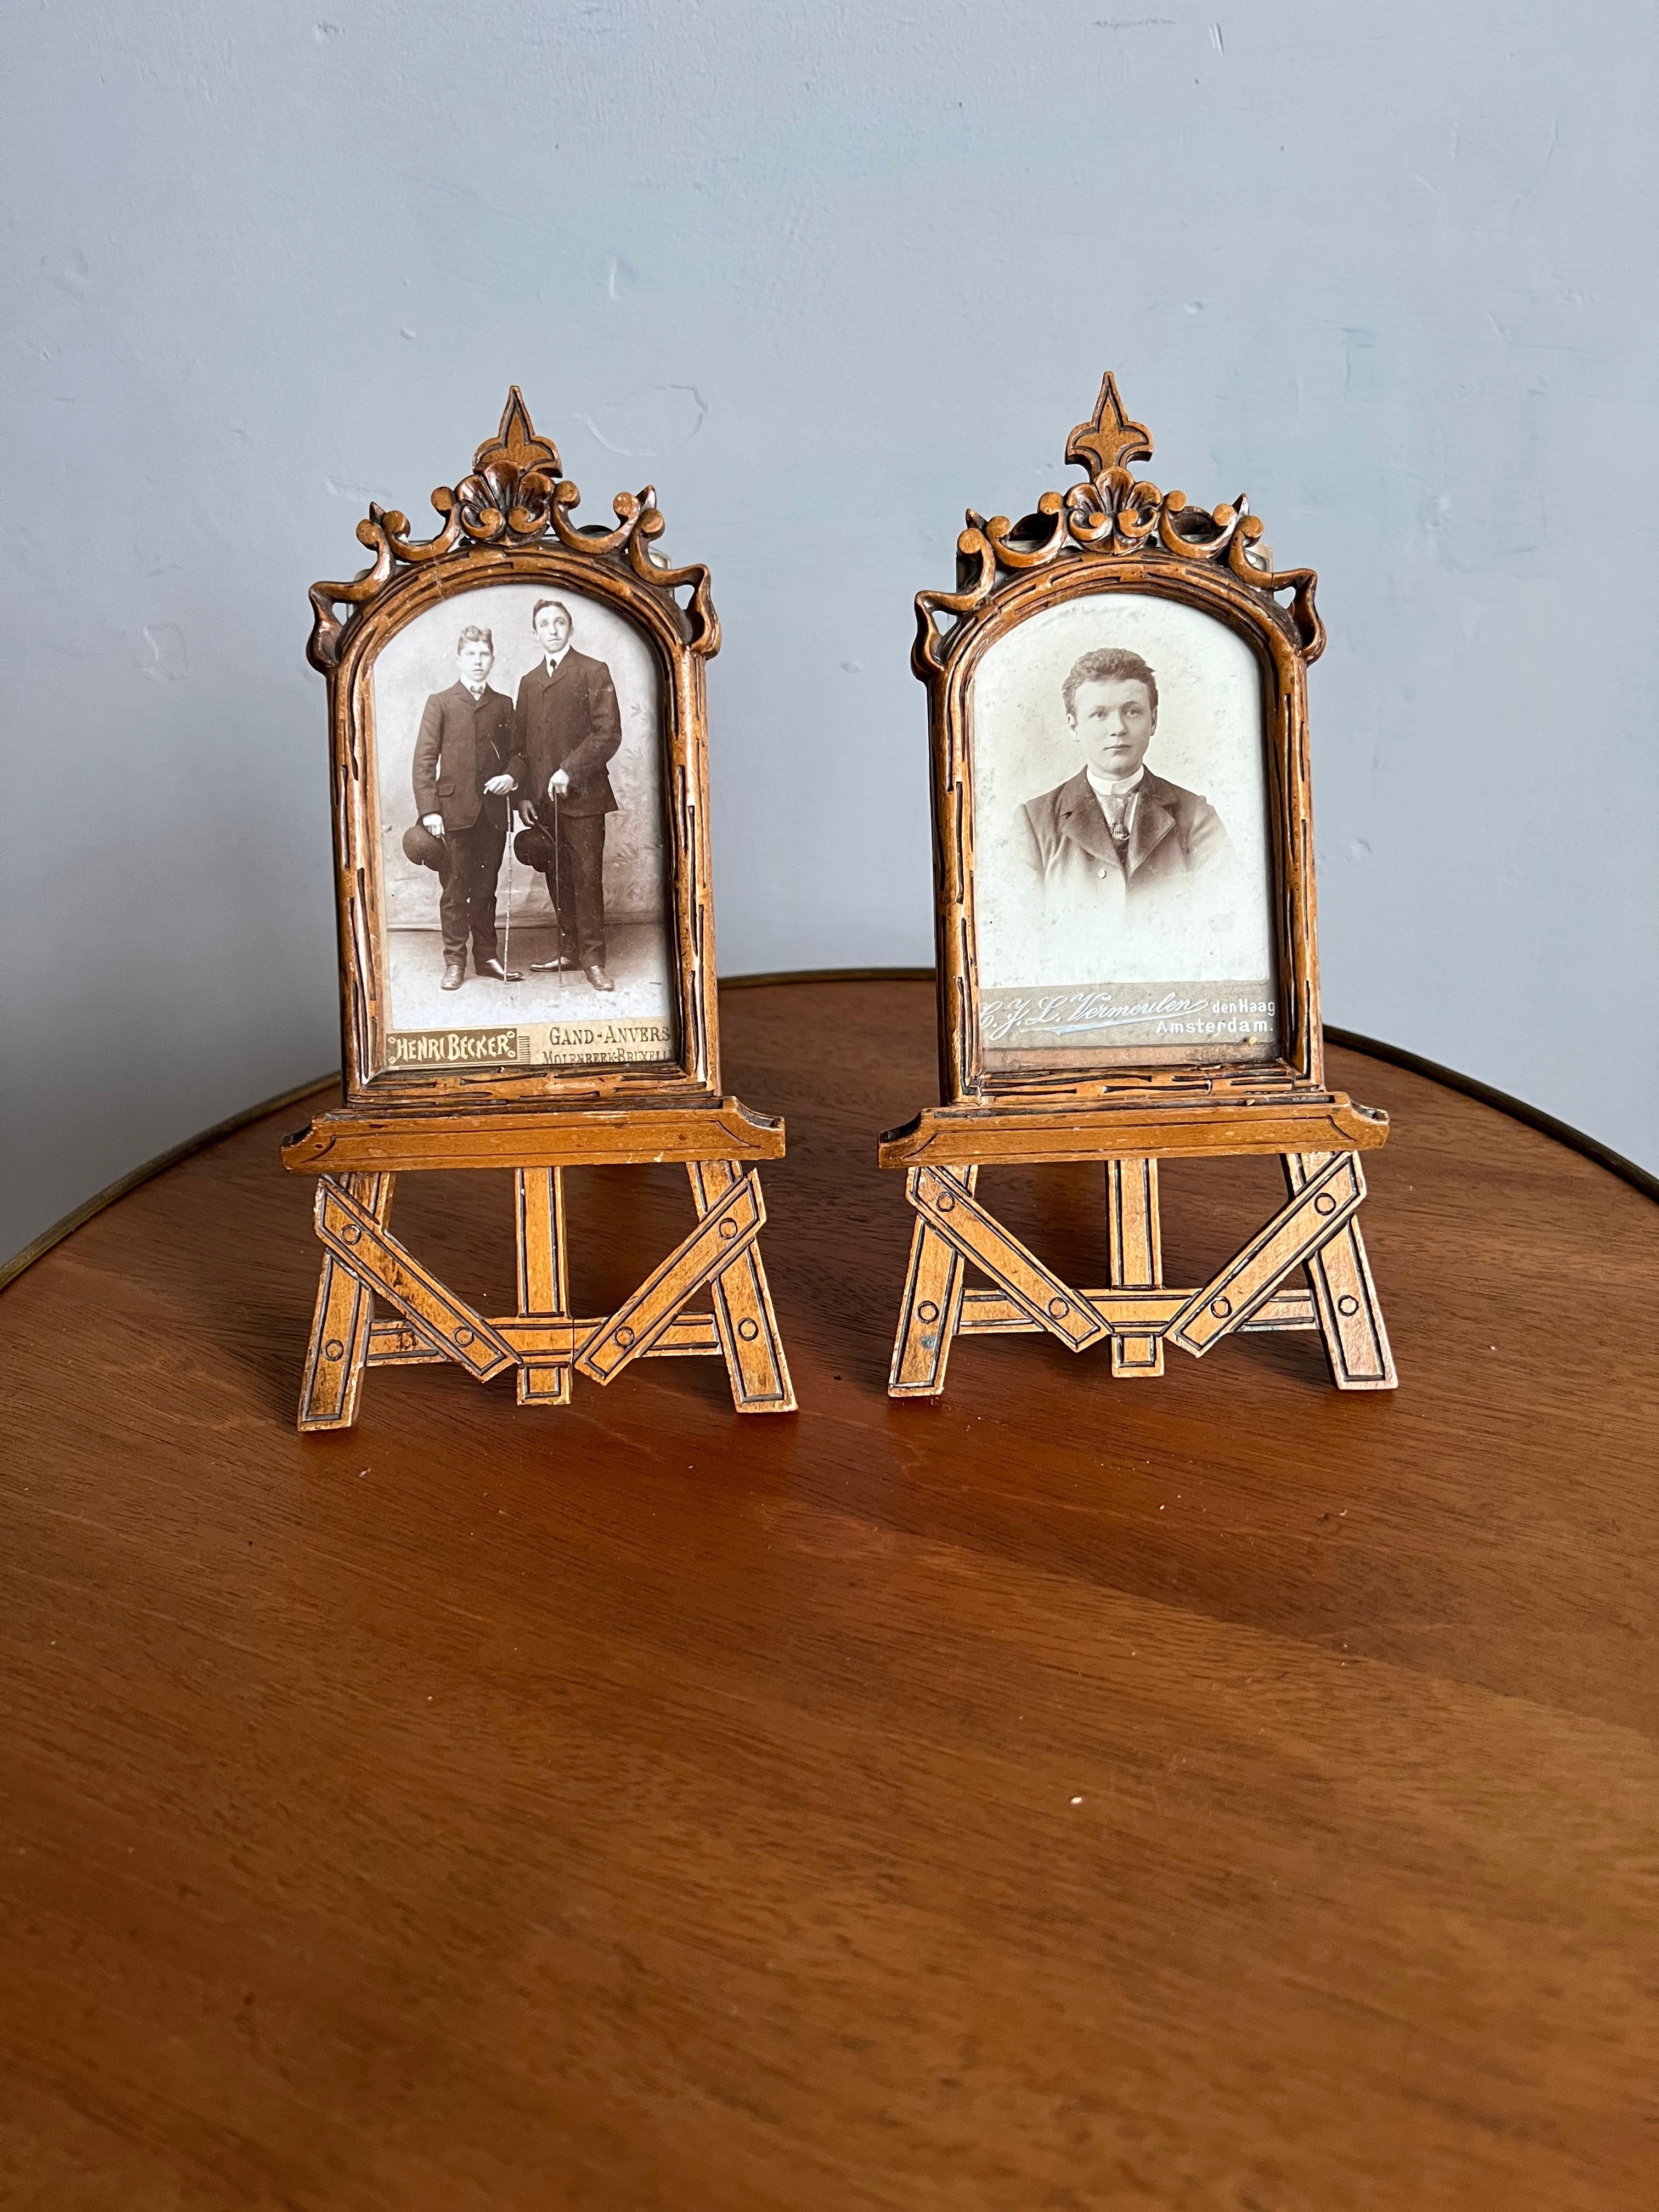 Stylish and perfectly handcrafted pair of early 1900s, table easel design photo frames.

If you are looking for the perfect picture frames for a pair of small photos then this early 1900s pair could be ideal. They are small in size and they are as